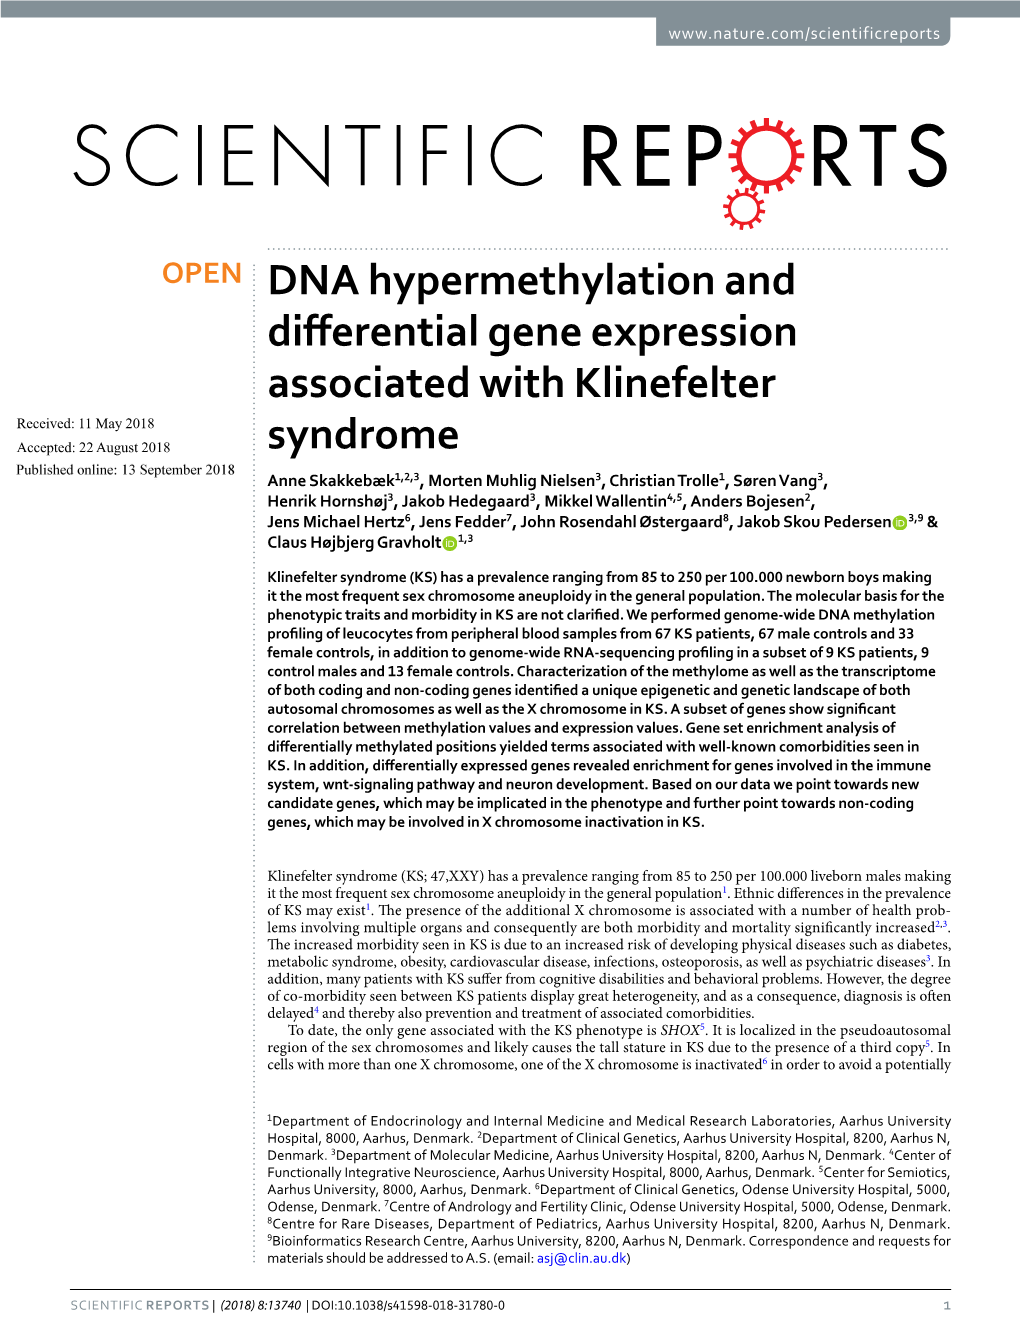 DNA Hypermethylation and Differential Gene Expression Associated With